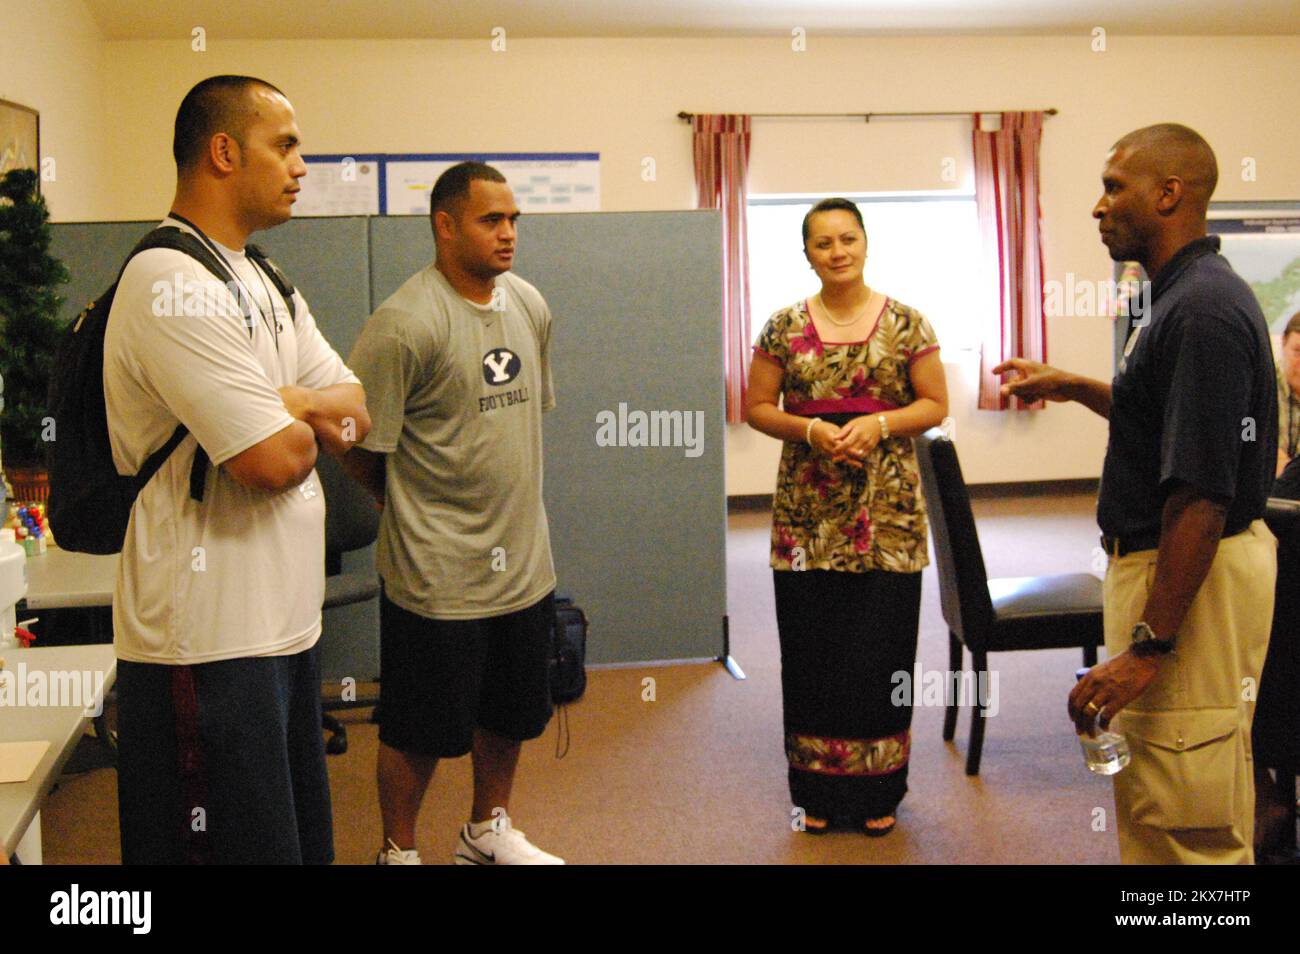 Former National Football League Players Visit Joint Field Office. American Samoa Earthquake, Tsunami, and Flooding. Photographs Relating to Disasters and Emergency Management Programs, Activities, and Officials Stock Photo